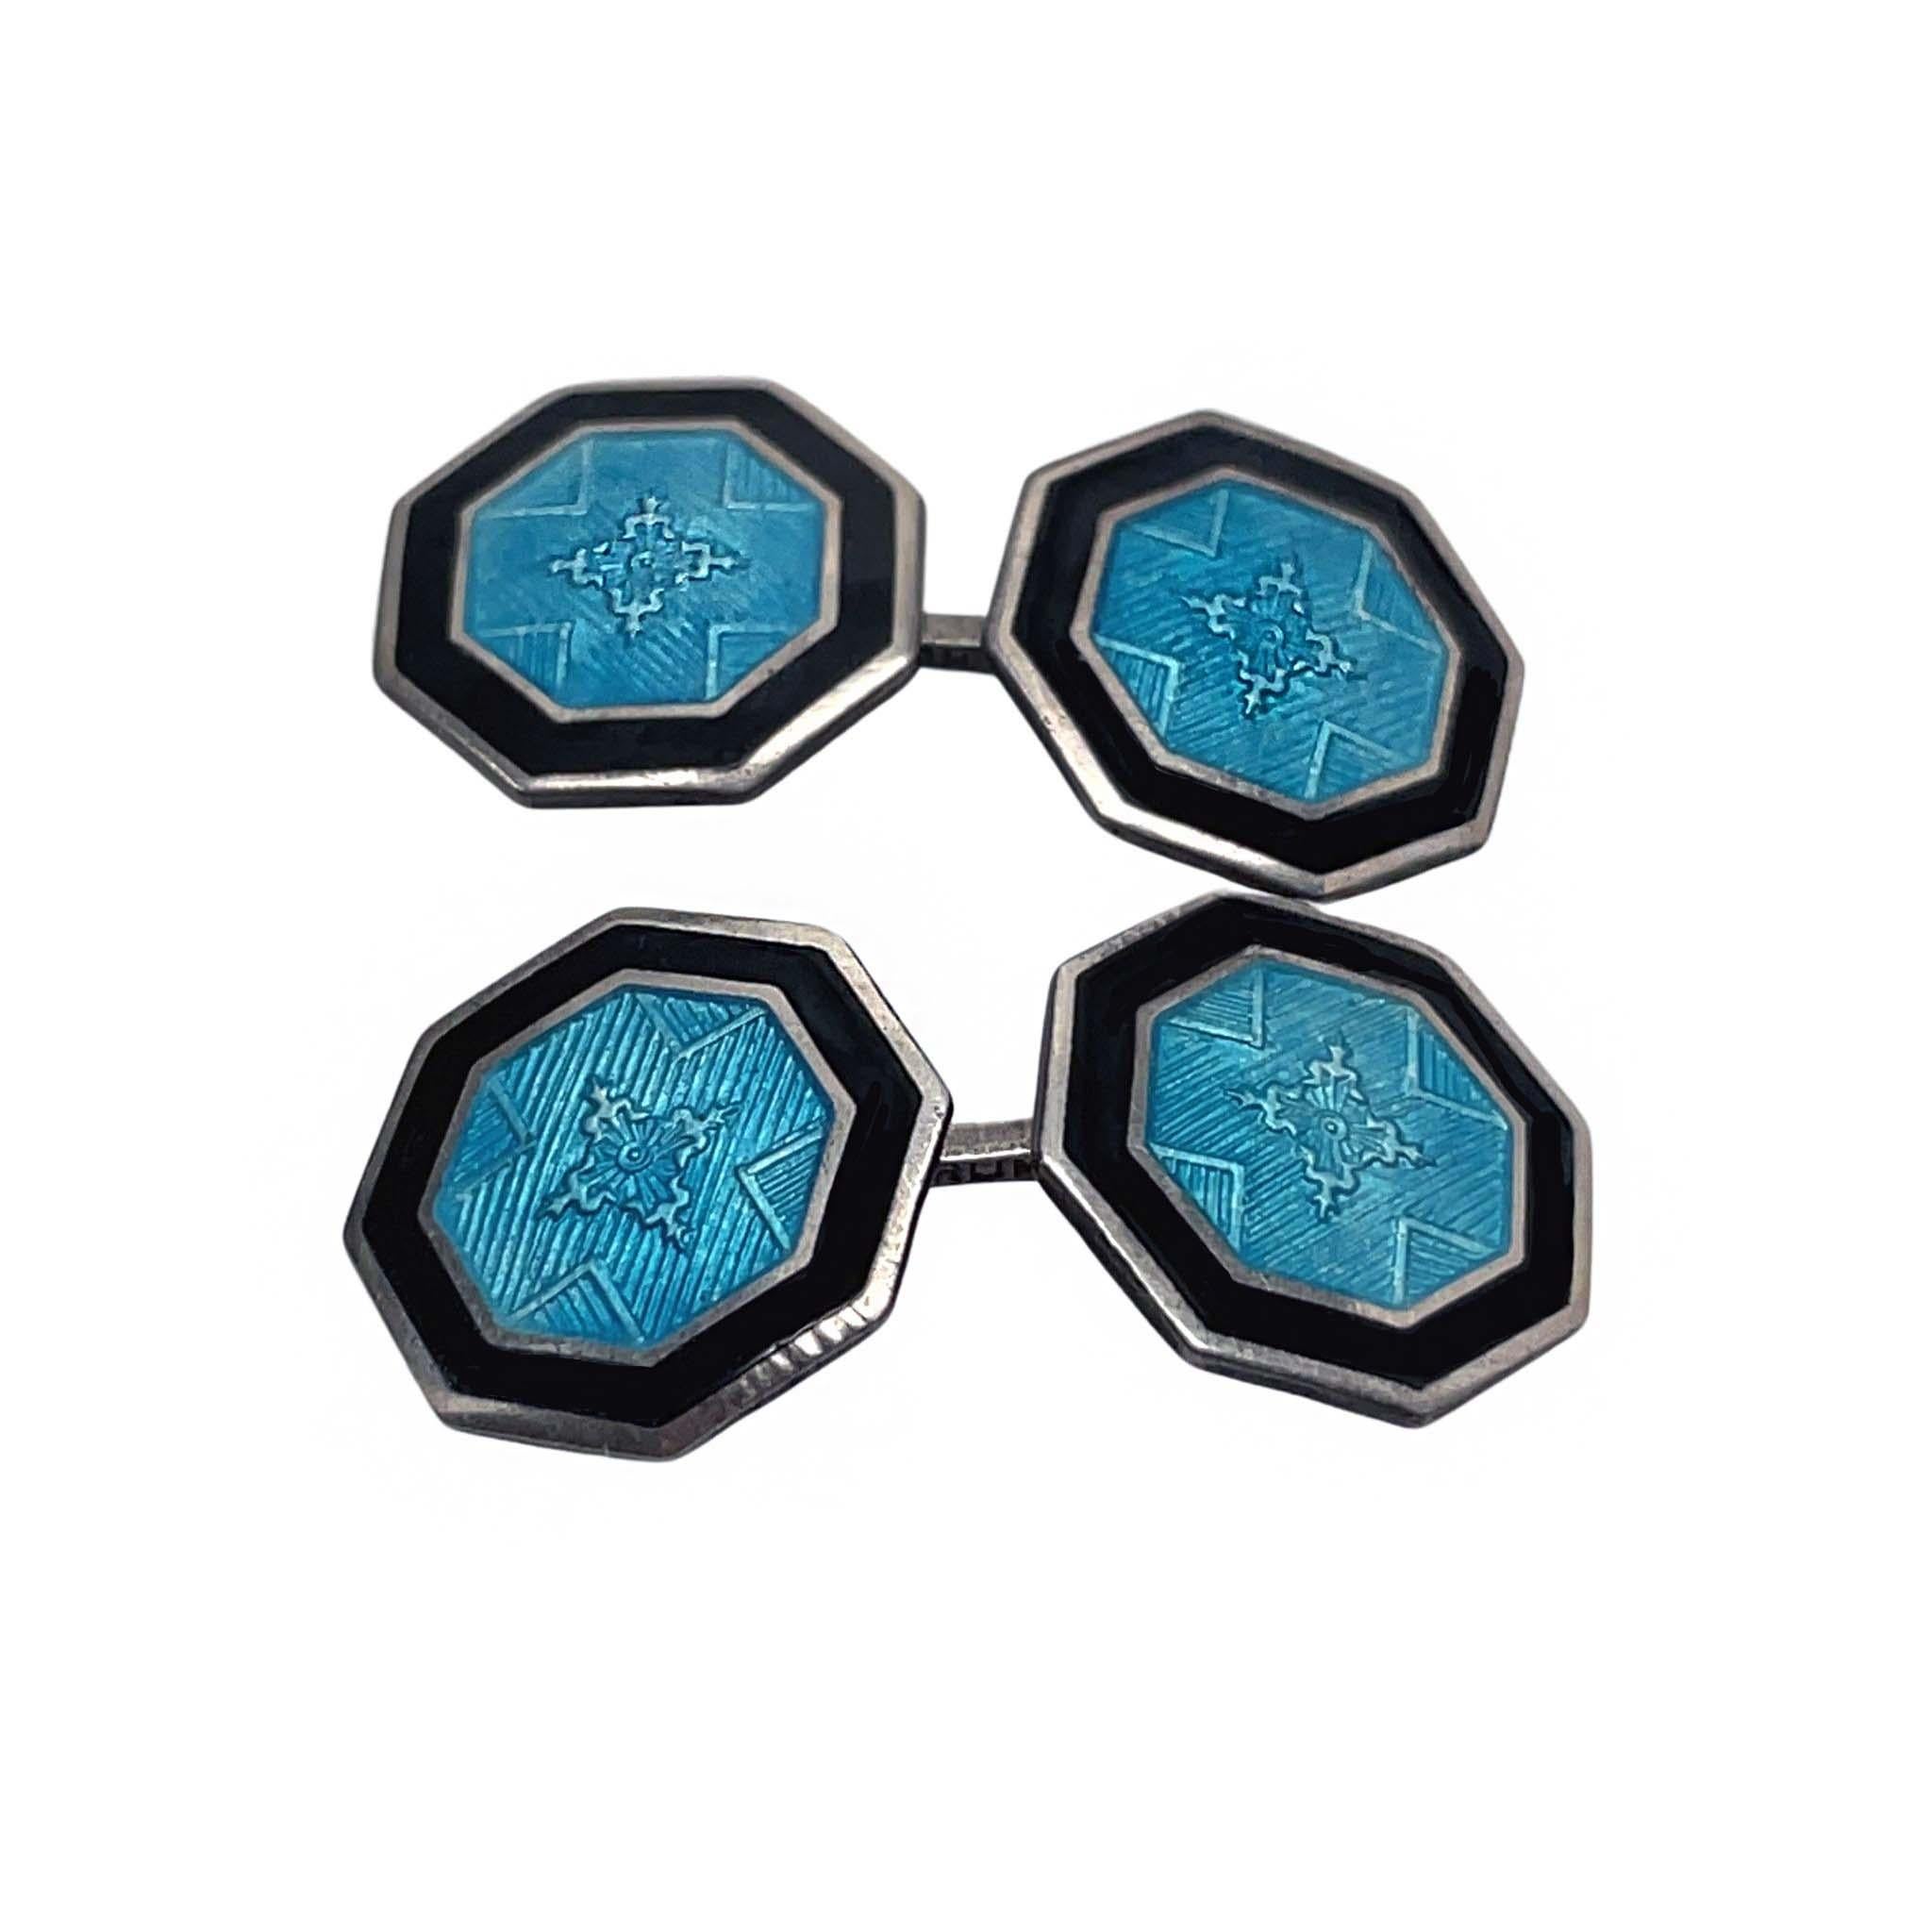 This is a terrific pair of sterling silver Art Deco cufflinks featuring gorgeous bright sky blue guilloche enamel and a dramatic opaque black enamel border! The links have a unique hexagonal shape and would look fantastic on a white shirt and even